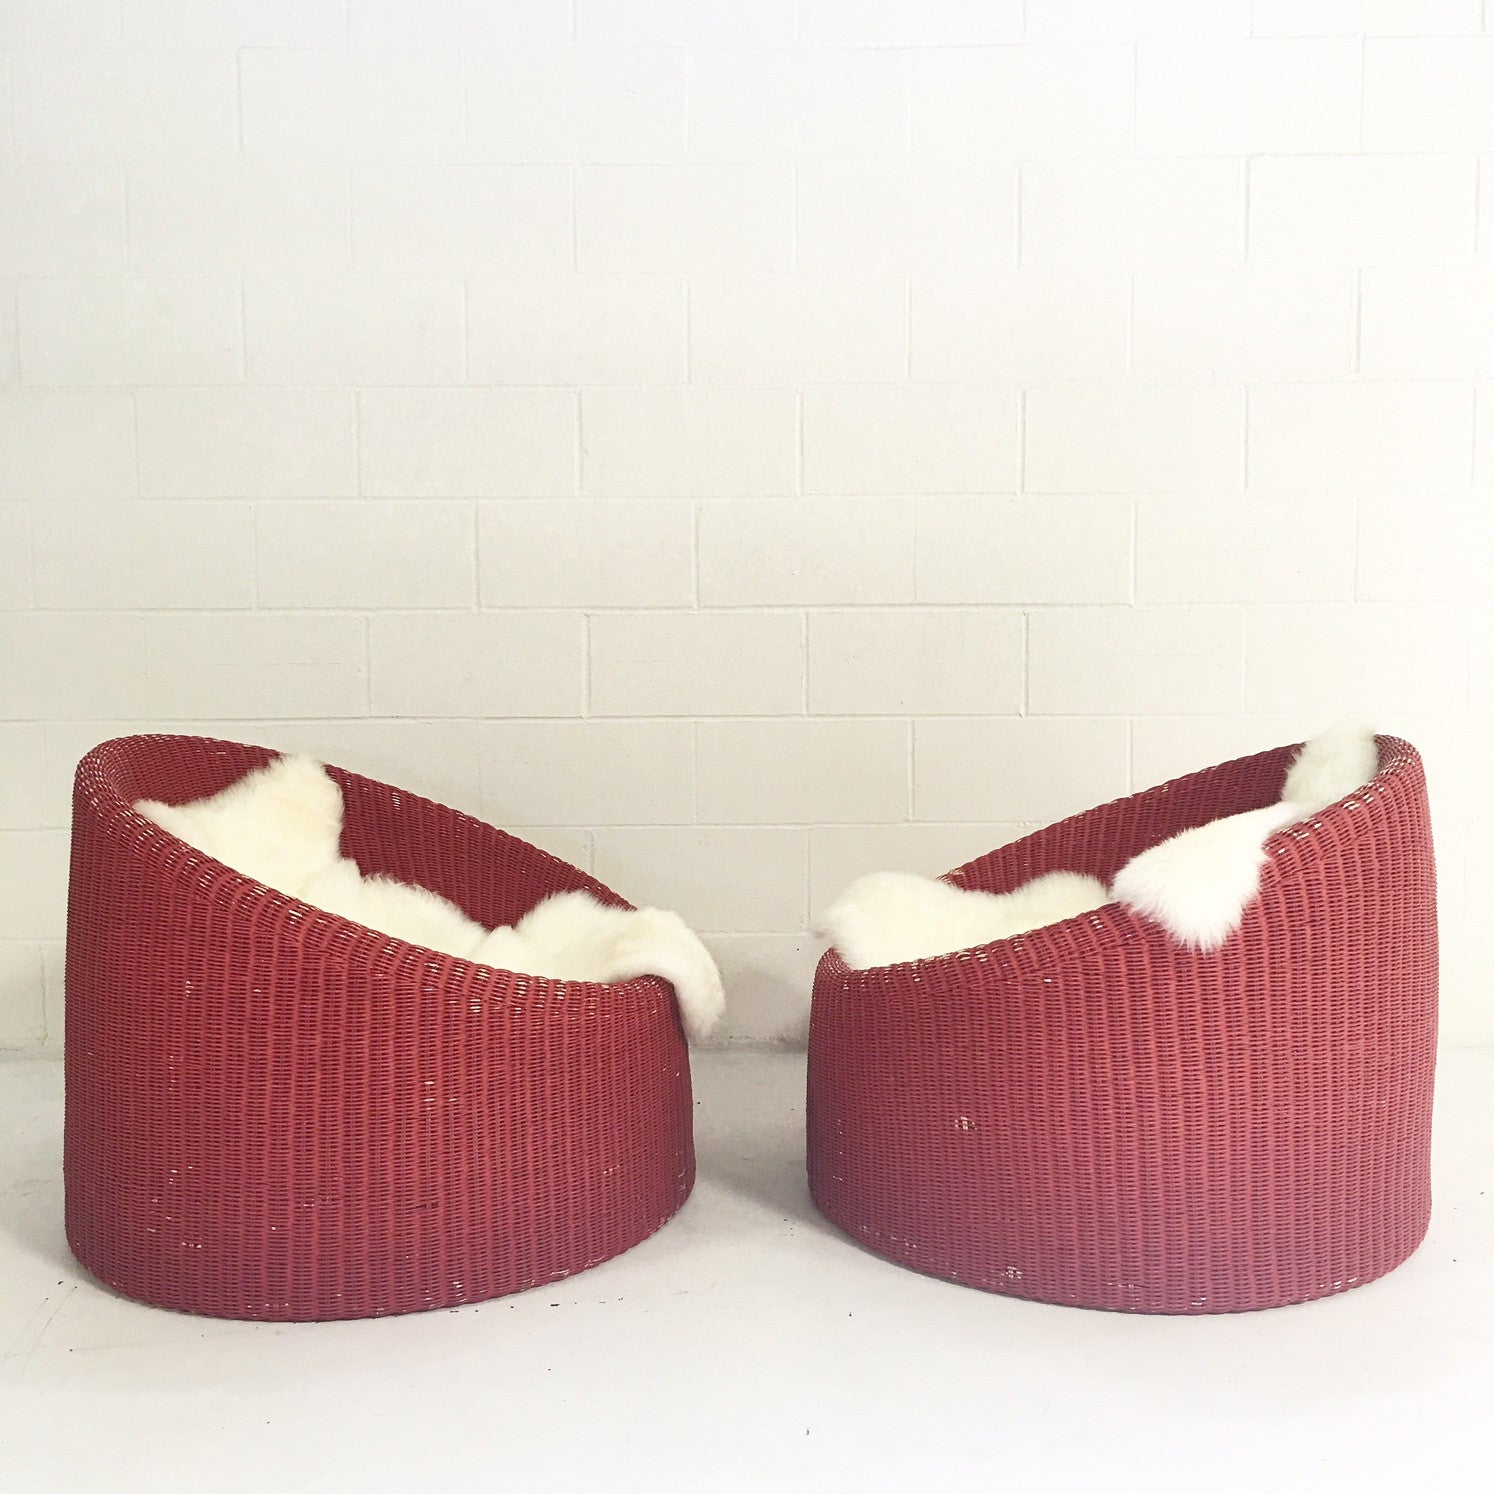 Rattan Lounge Chairs with Sheepskins, pair - FORSYTH